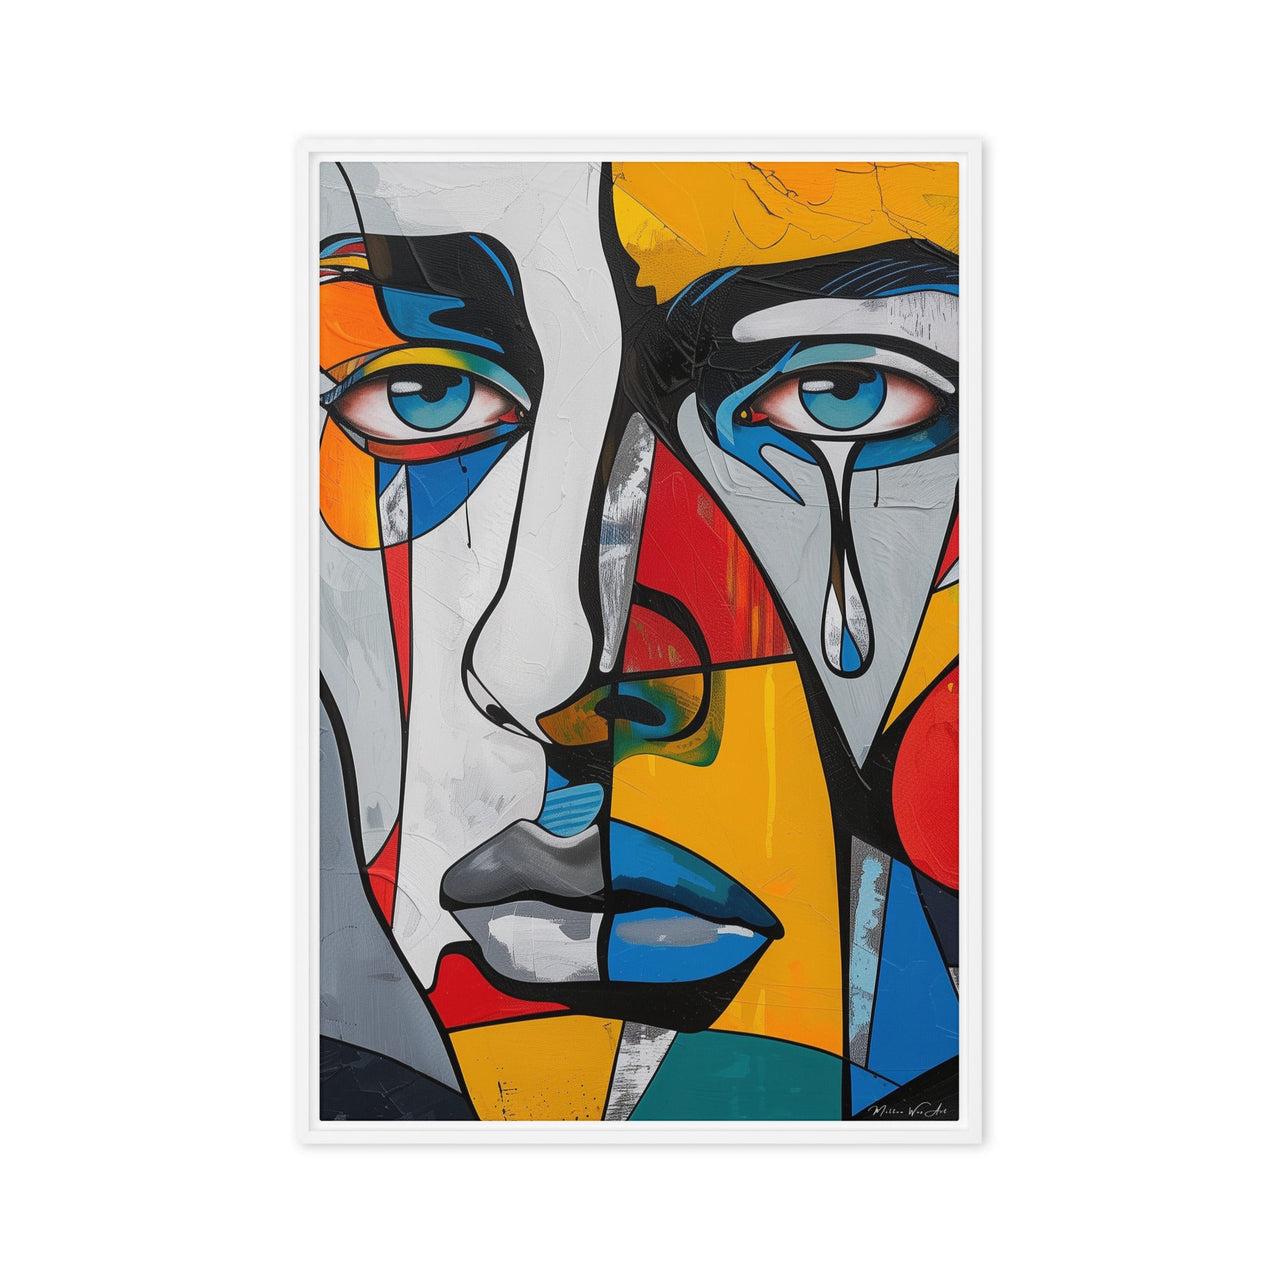 Modern abstract face painting with bold blue, yellow, and red accents from Milton Wes Art, bringing a touch of contemporary artistry to a sleek bedroom with dark walls and winter scenery visible through the window.